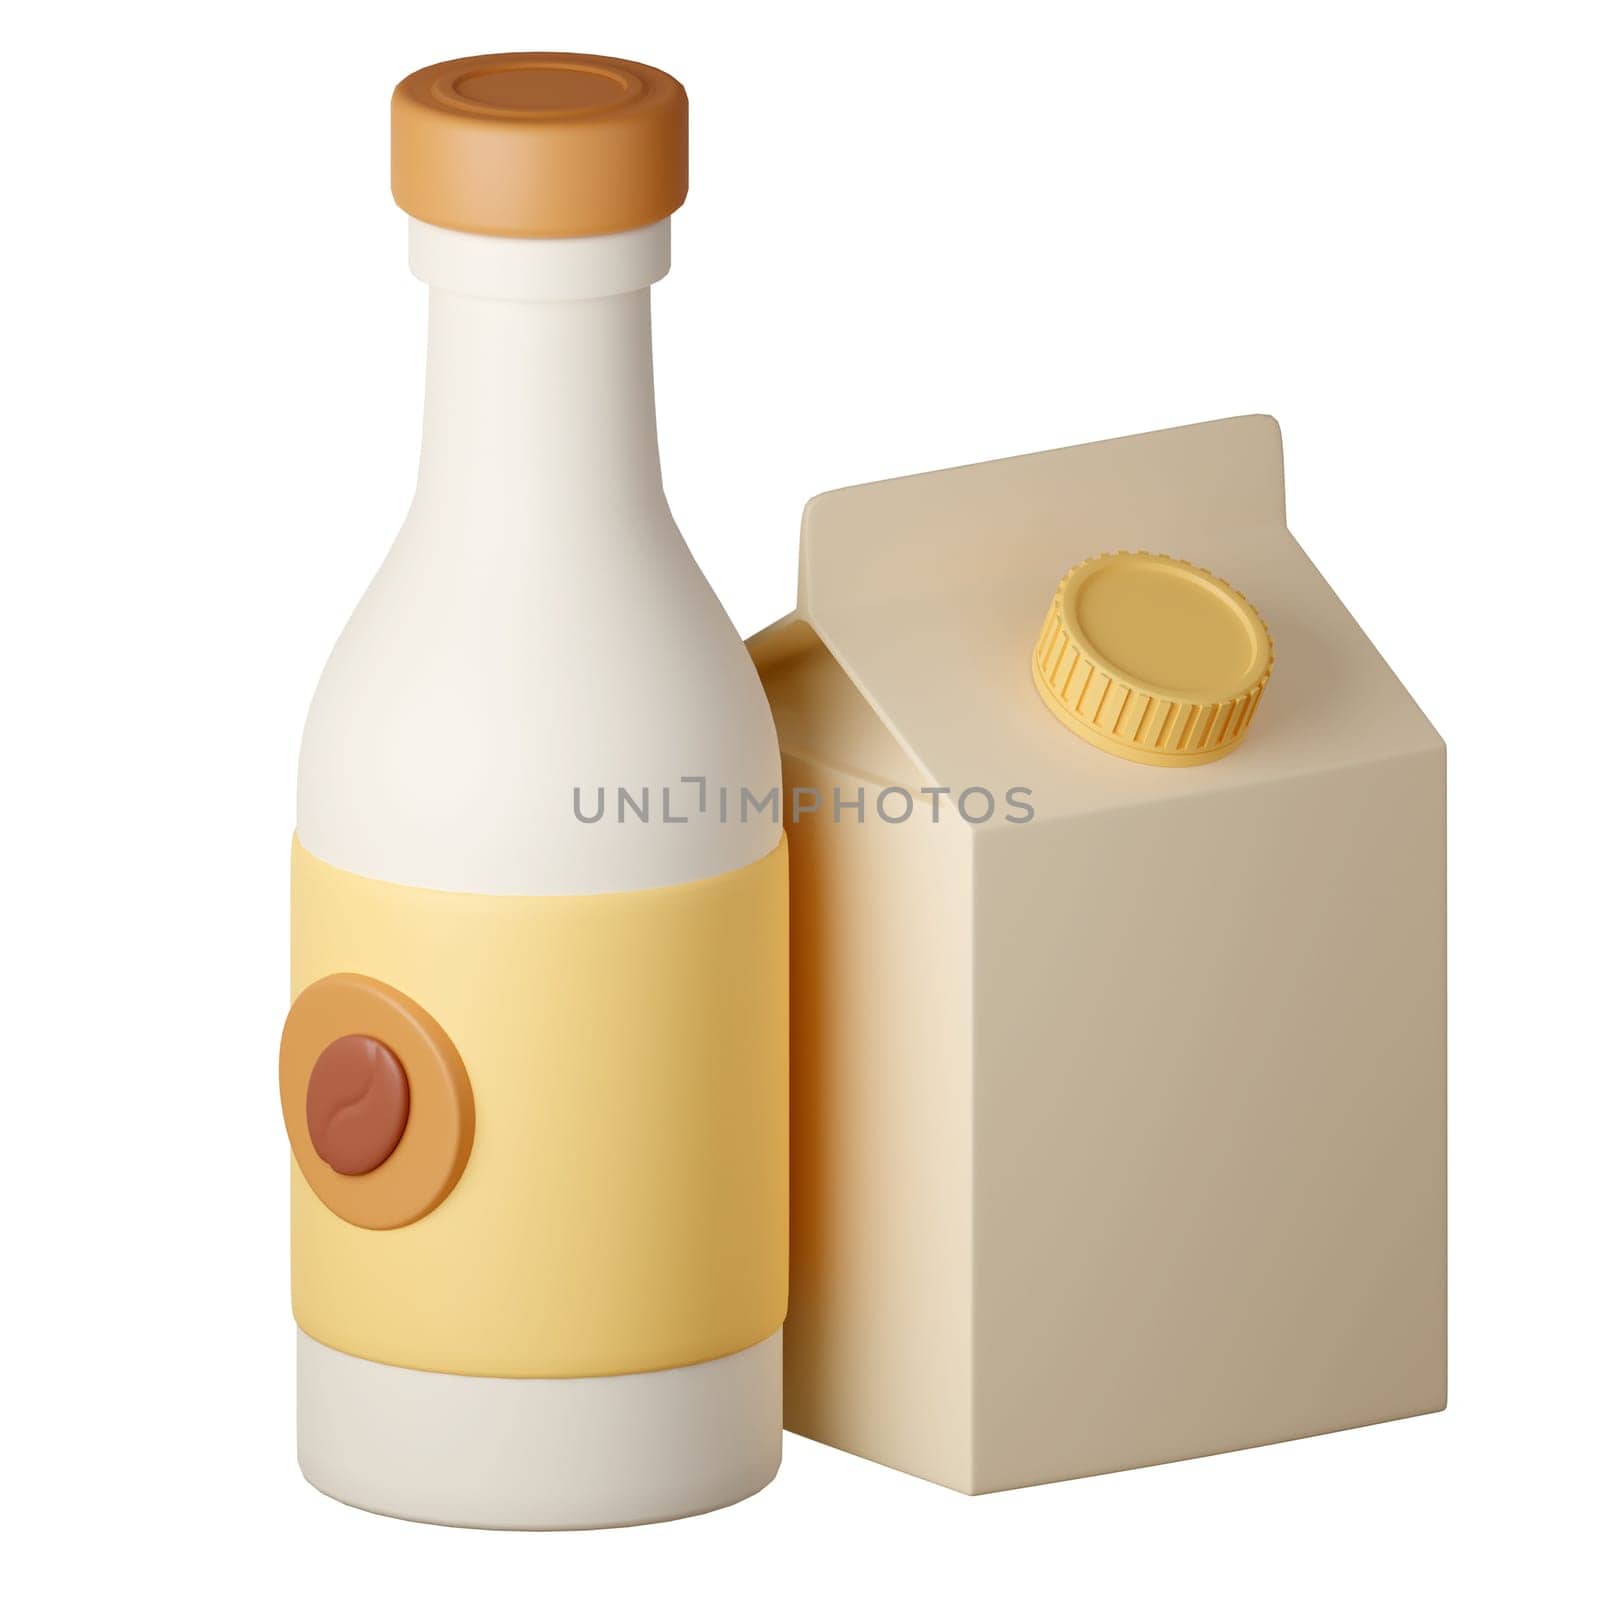 3d a carton coffee milk latte and a bottle of coffee milk Cartoon Style Isolated on a White Background. 3d illustration by meepiangraphic